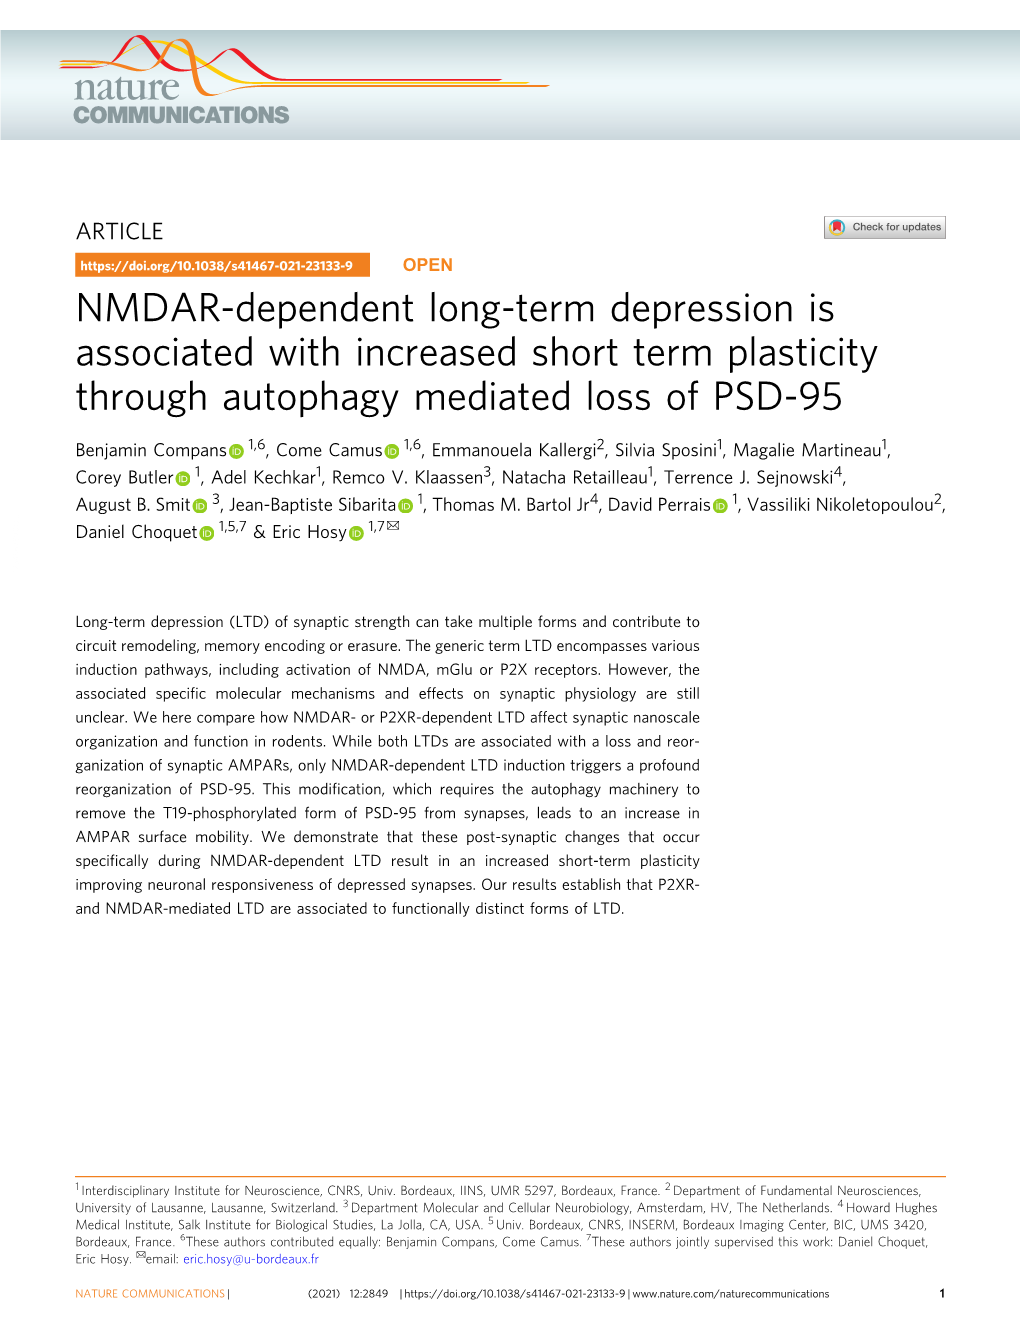 NMDAR-Dependent Long-Term Depression Is Associated with Increased Short Term Plasticity Through Autophagy Mediated Loss of PSD-95